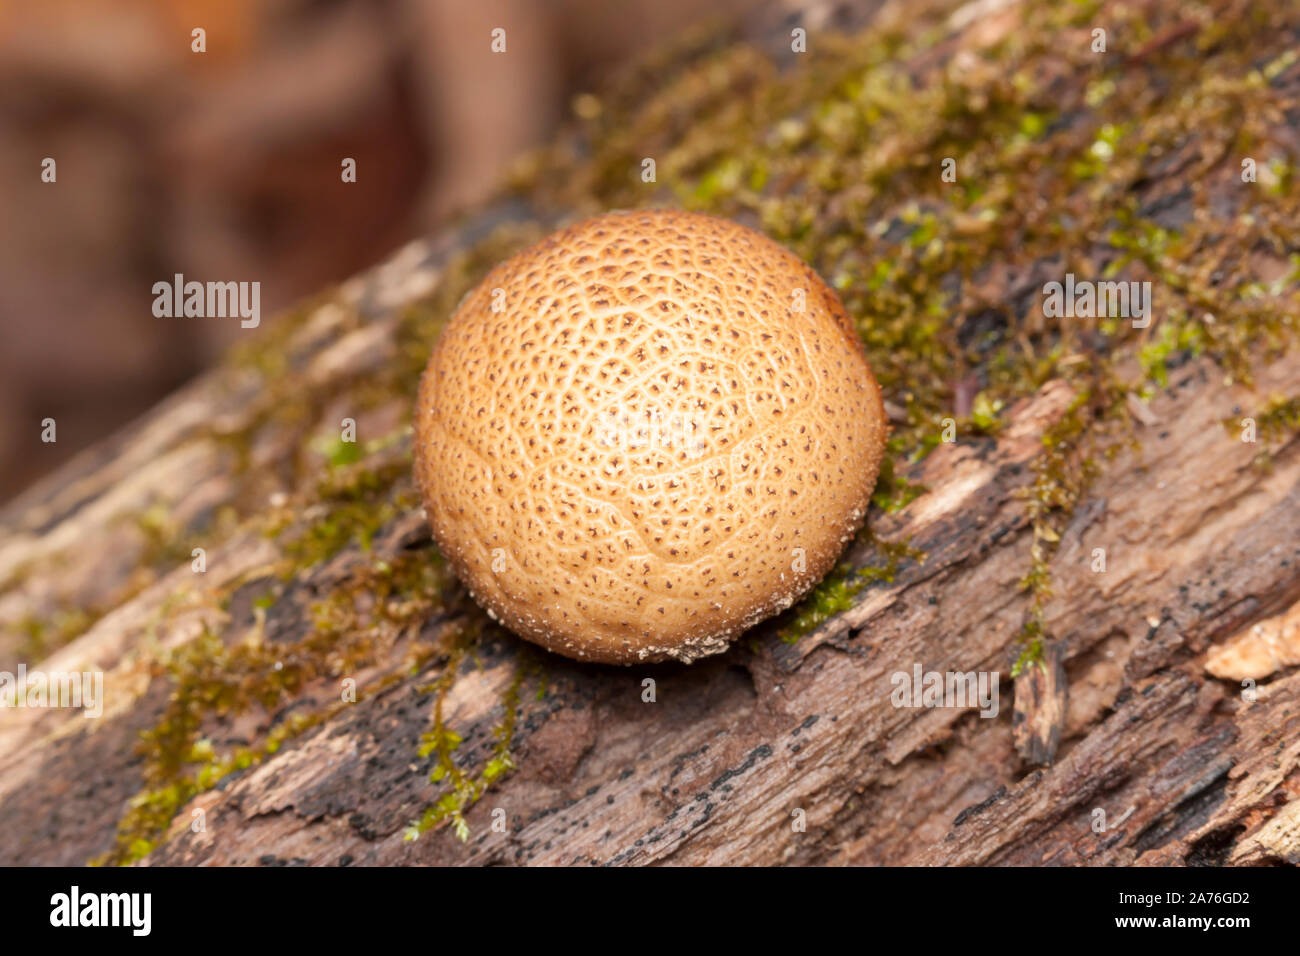 A Common Earthball (Scleroderma citrinum) growing on a decaying log. Stock Photo